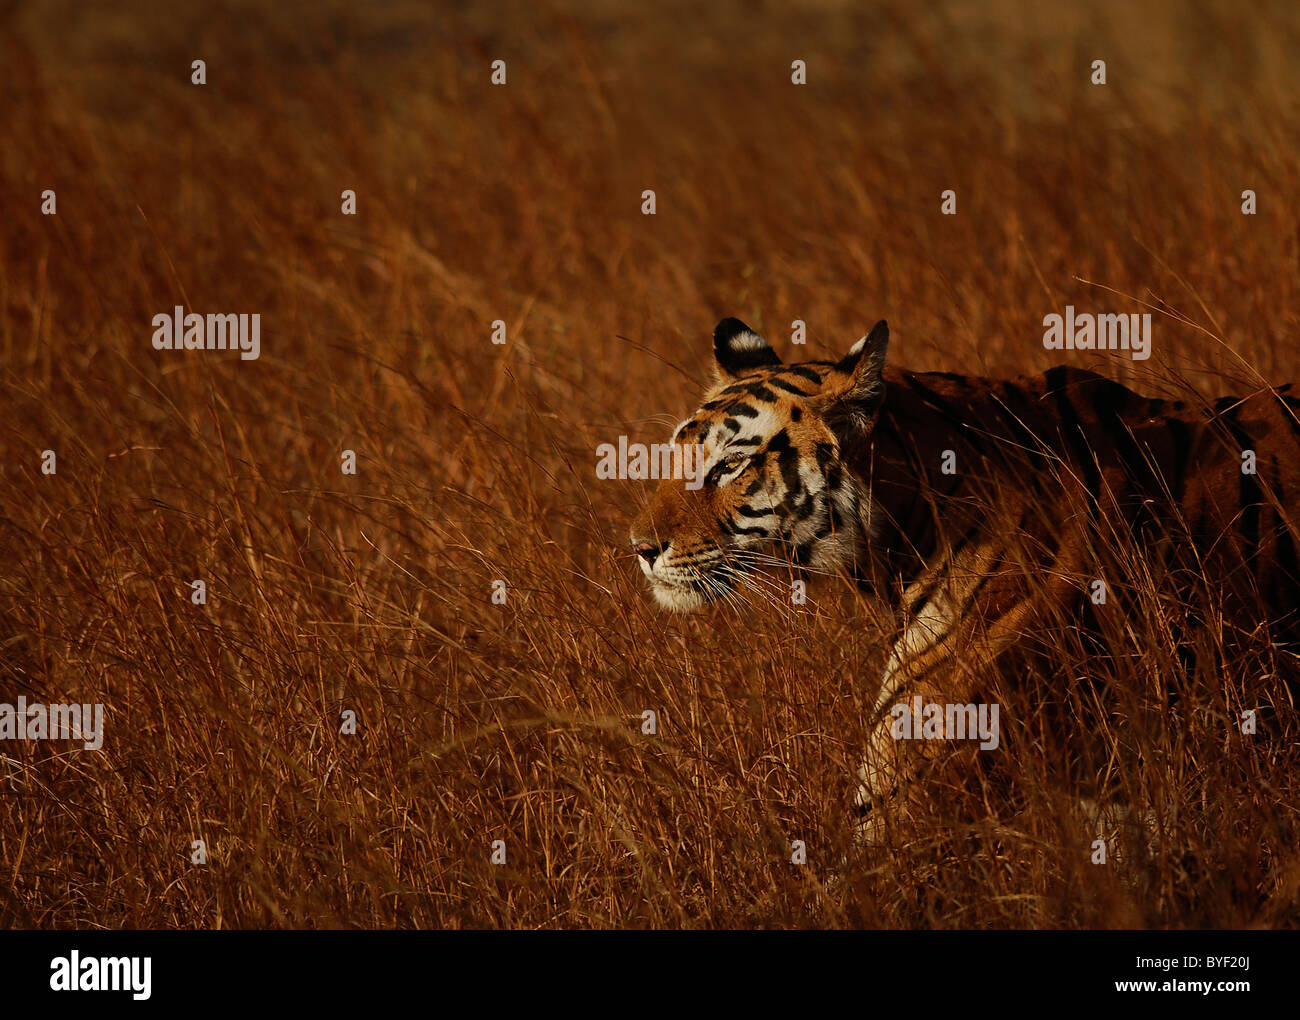 Adult female Bengal Tiger walking through a meadow of dry grass in Bandhavgarh Tiger Reserve, India Stock Photo